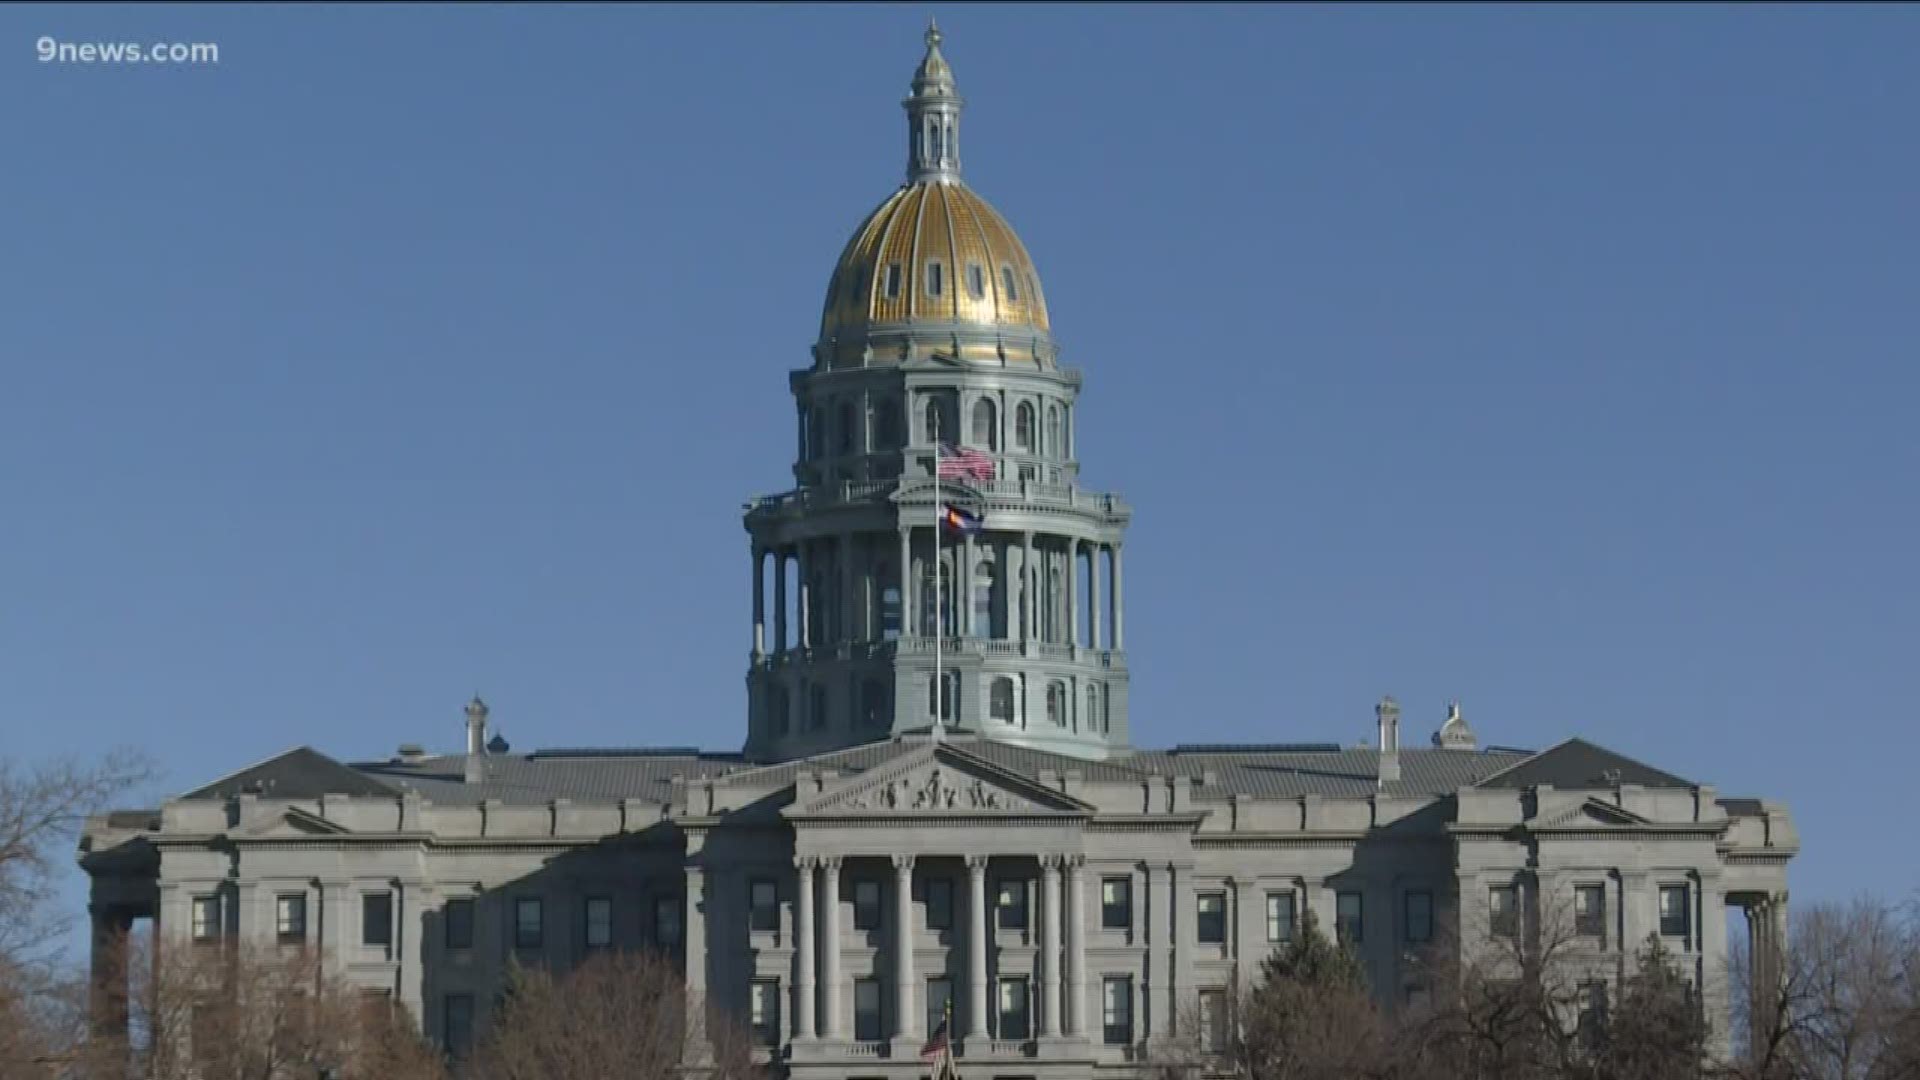 Colorado Governor Jared Polis delivered his second State of the State address from the Colorado State Capitol on Thursday.